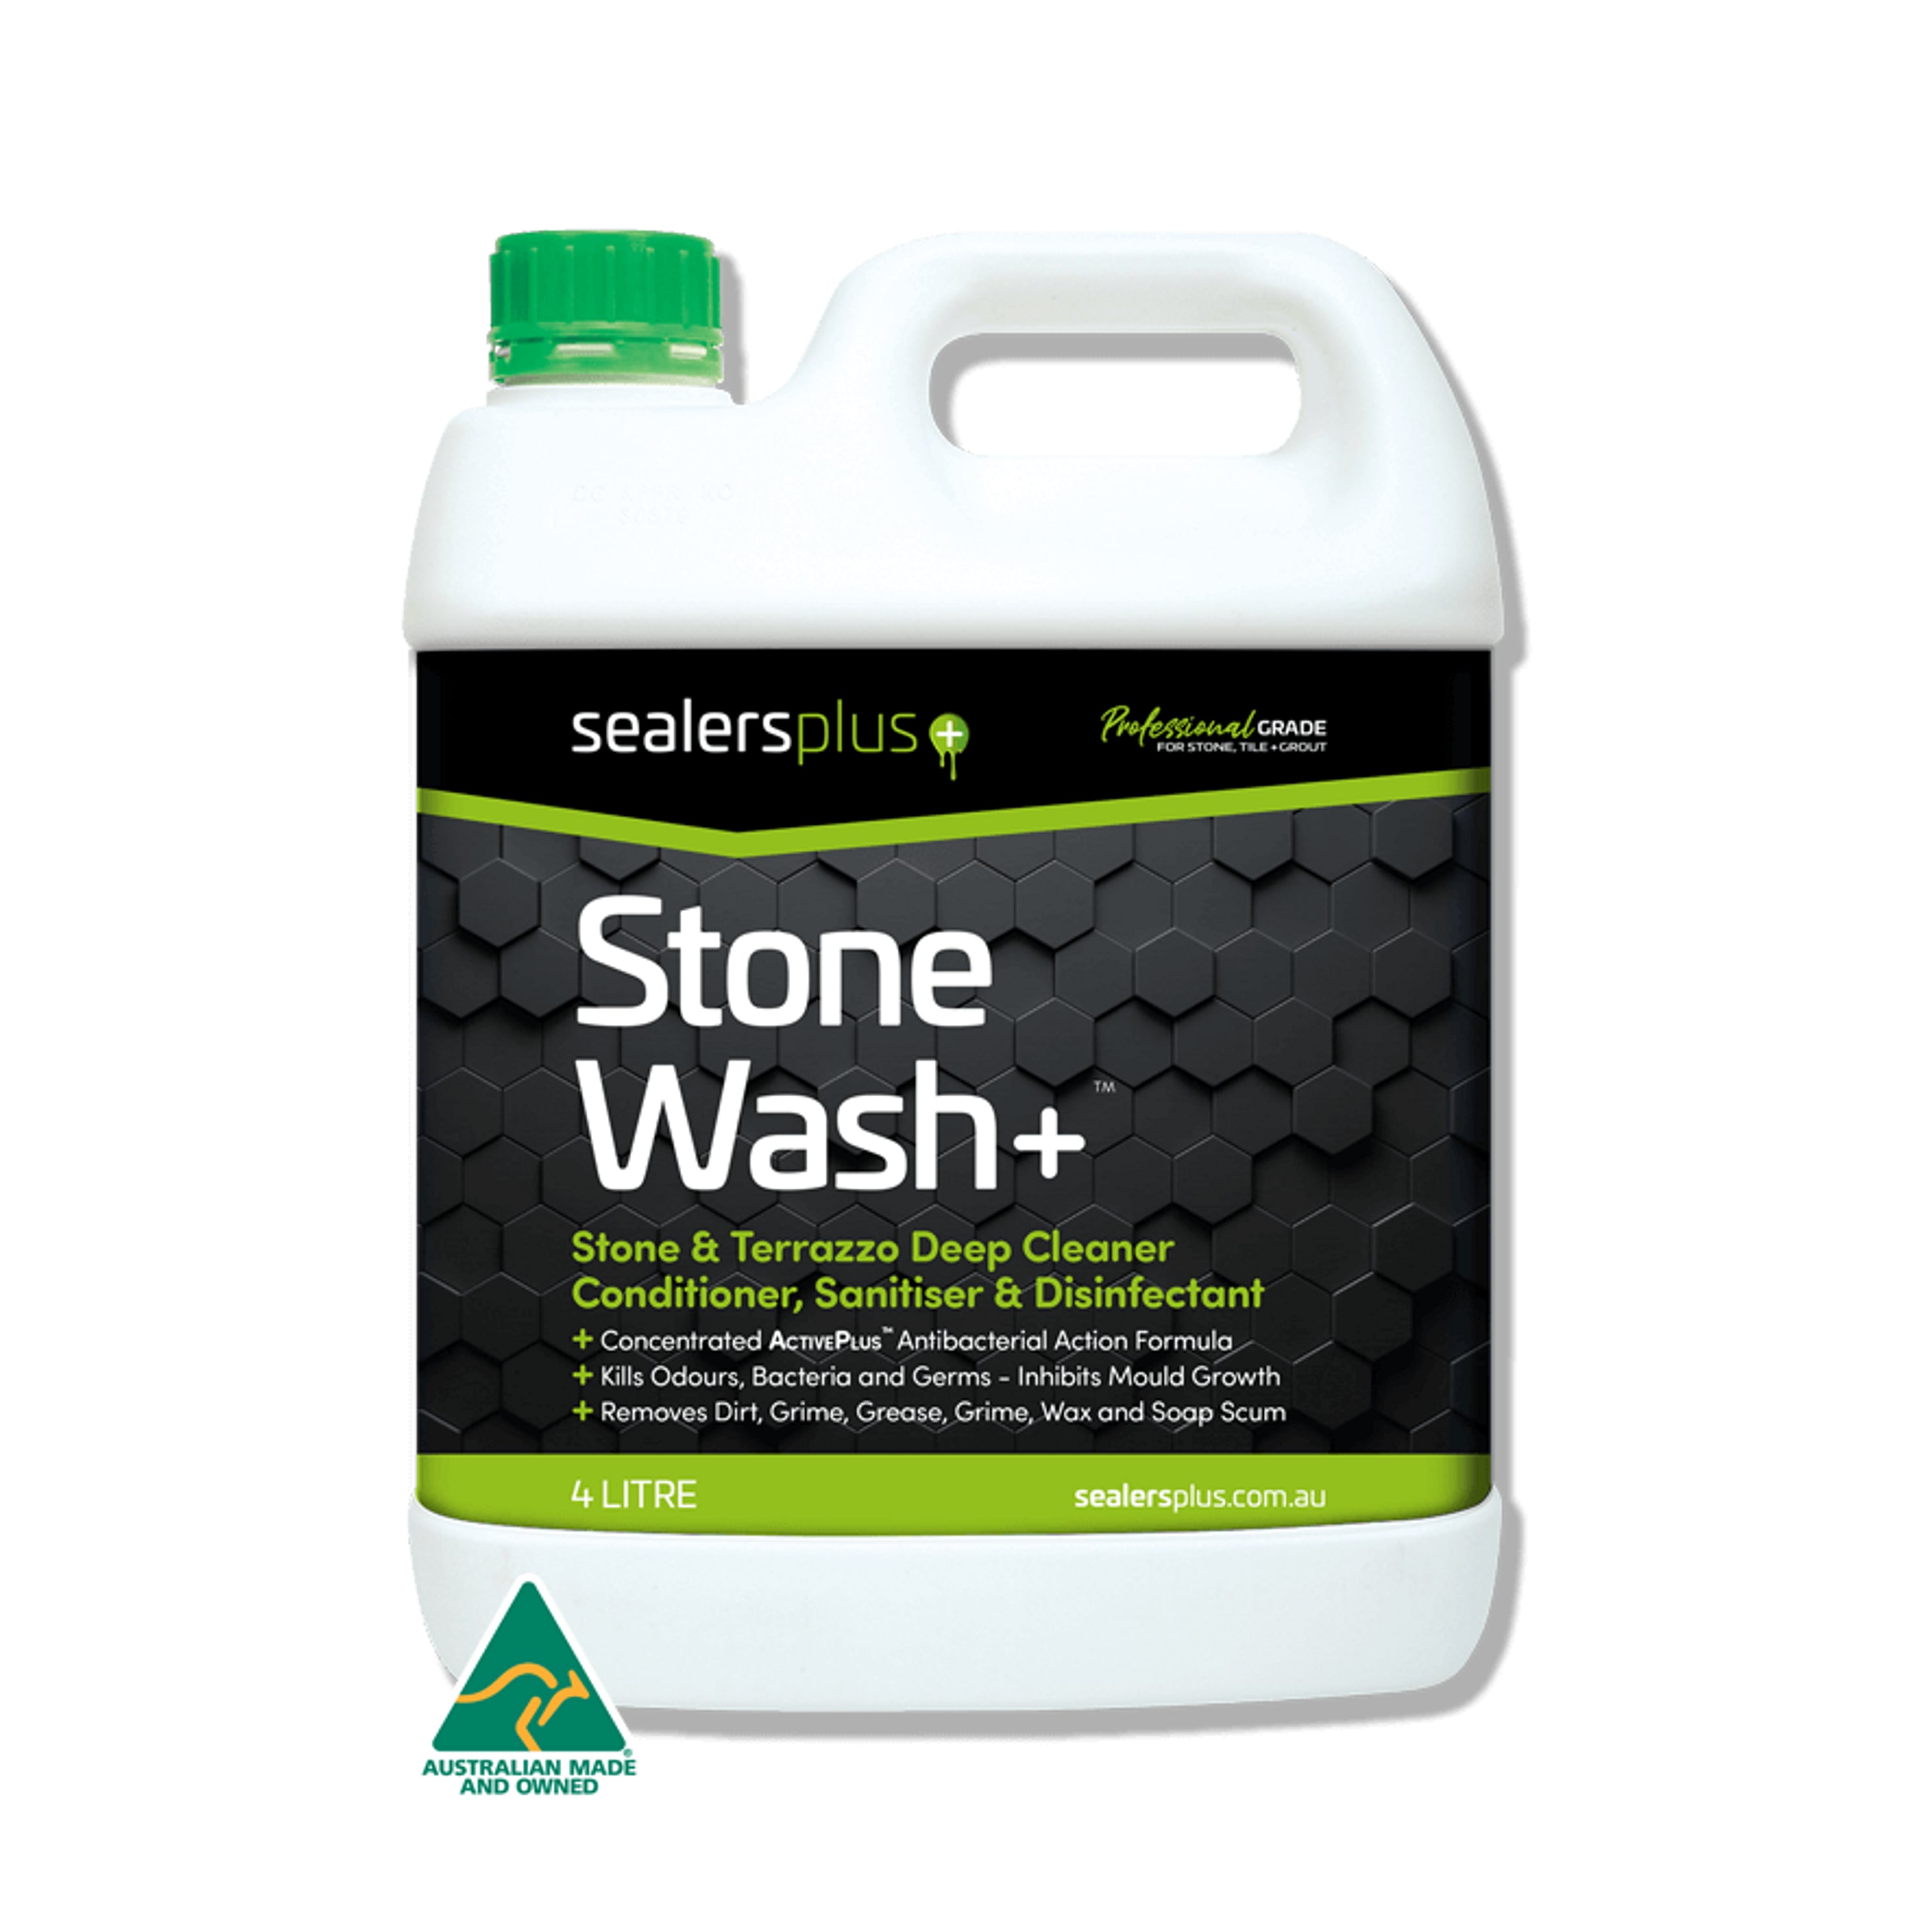 Stone Wash+ – Natural Stone, Encaustic Tile And Terrazzo Deep Cleaner, Conditioner Plus Commercial Grade Disinfectant Aqua Seal